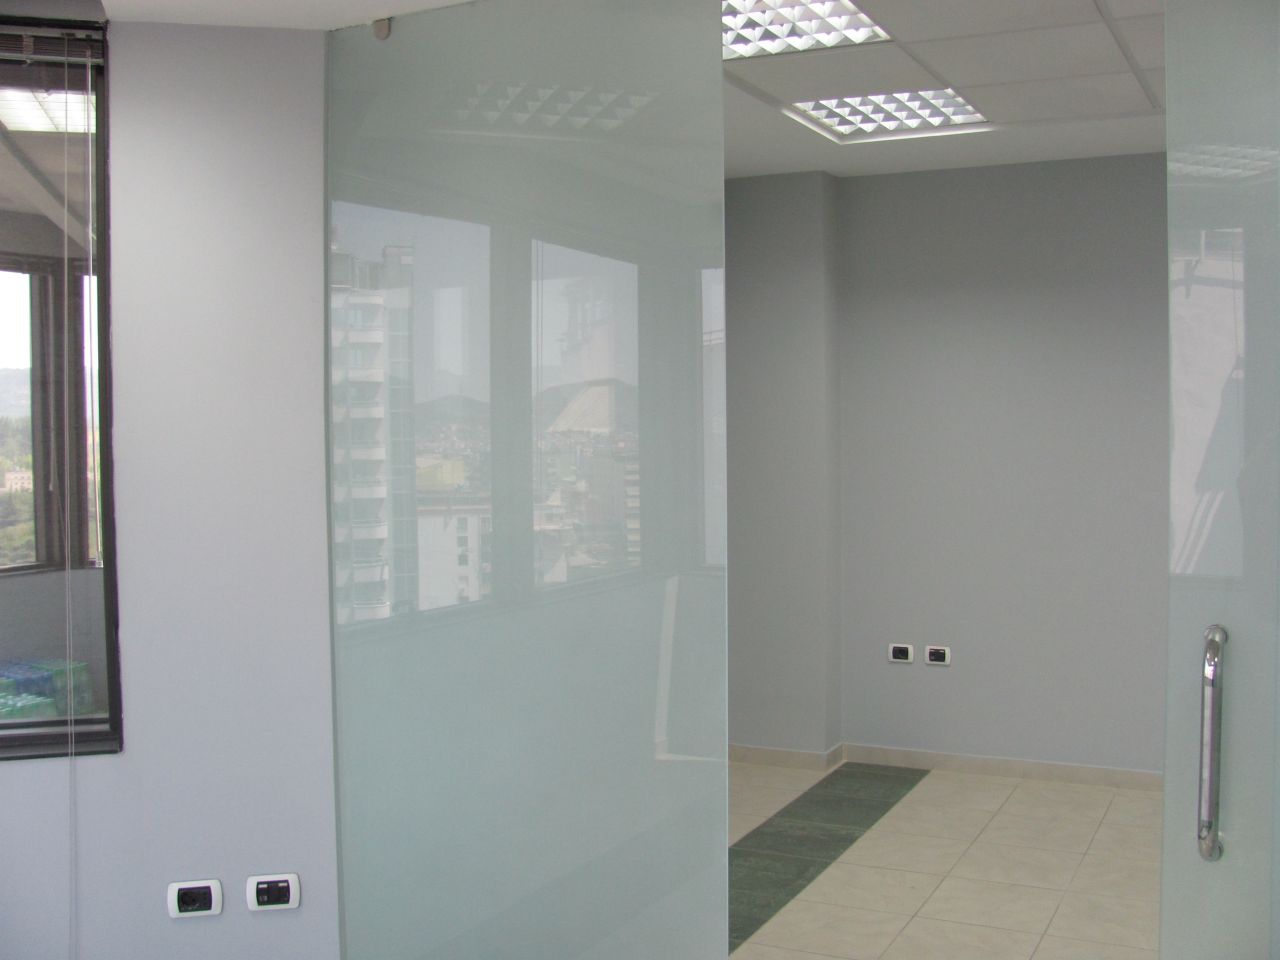 Office for Rent in Tirane. Albania Real Estate for Rent